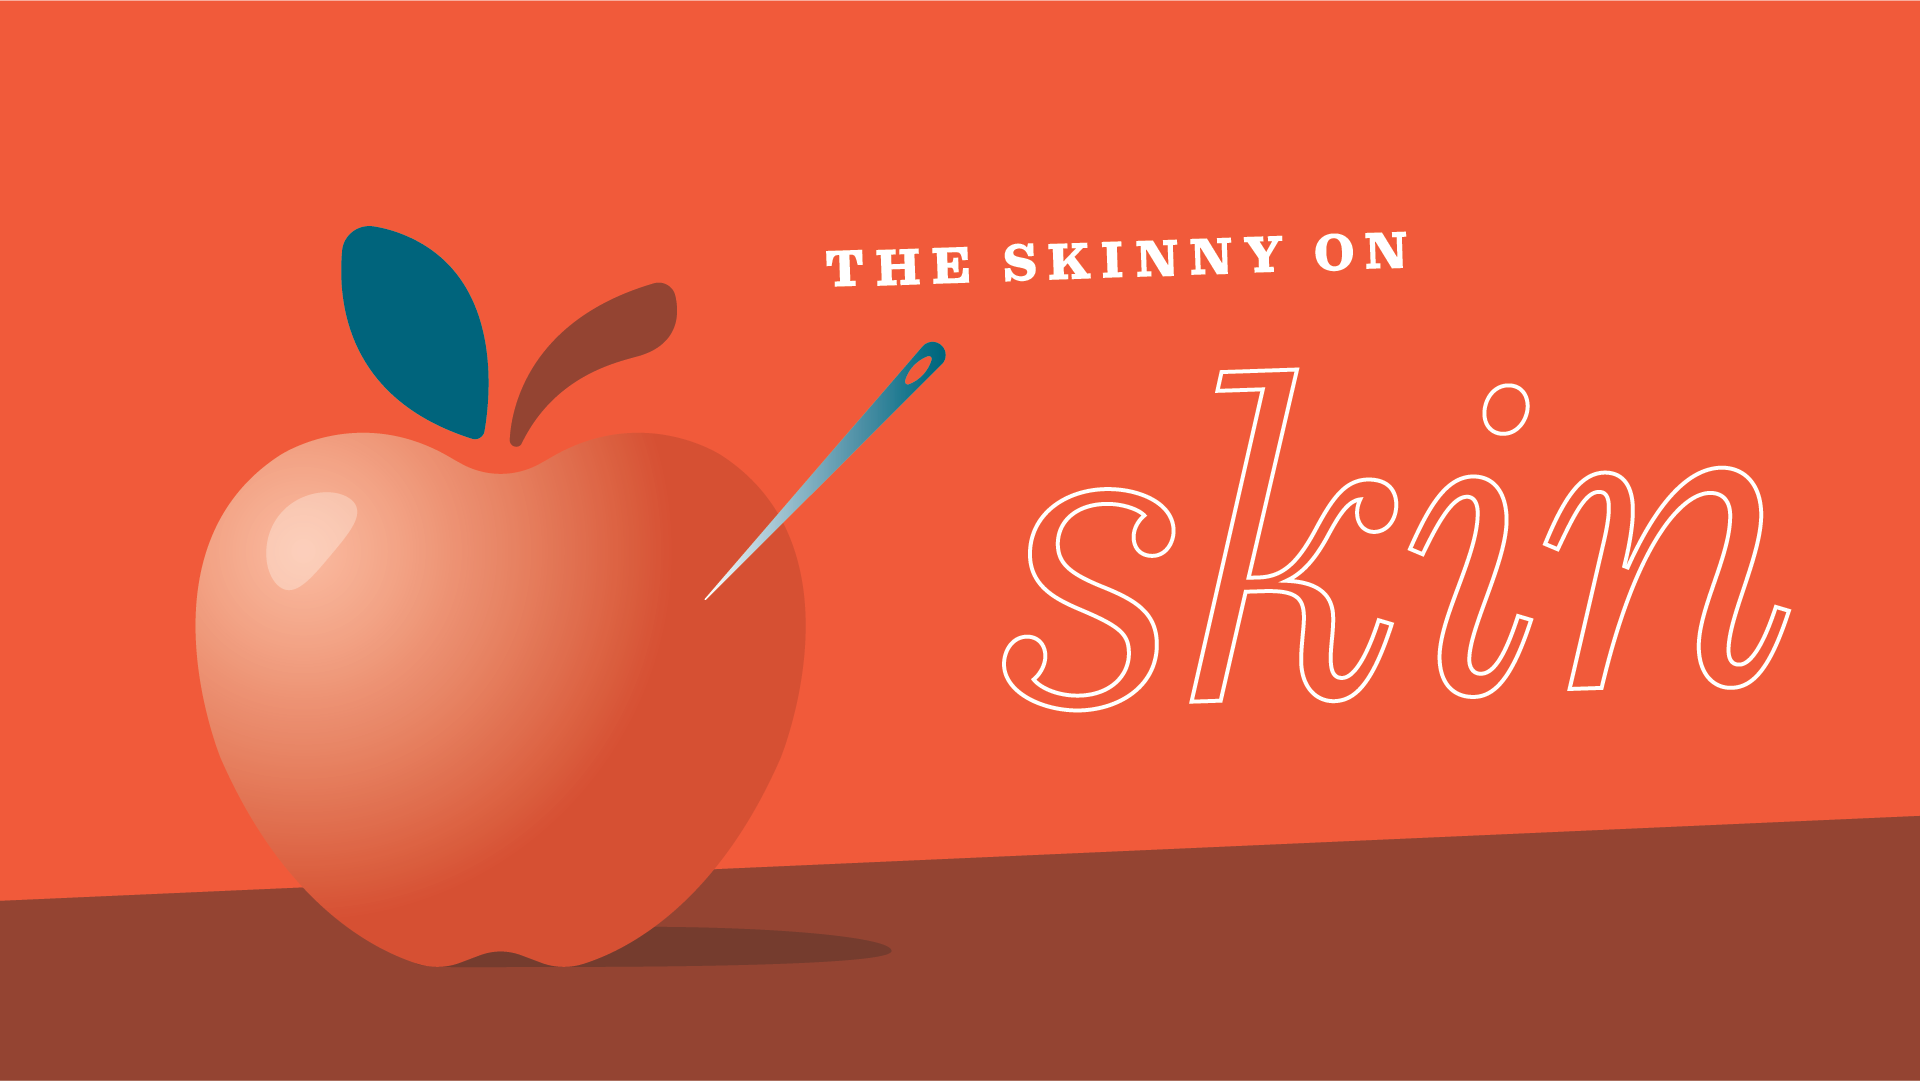 Even apples need skin science recipe